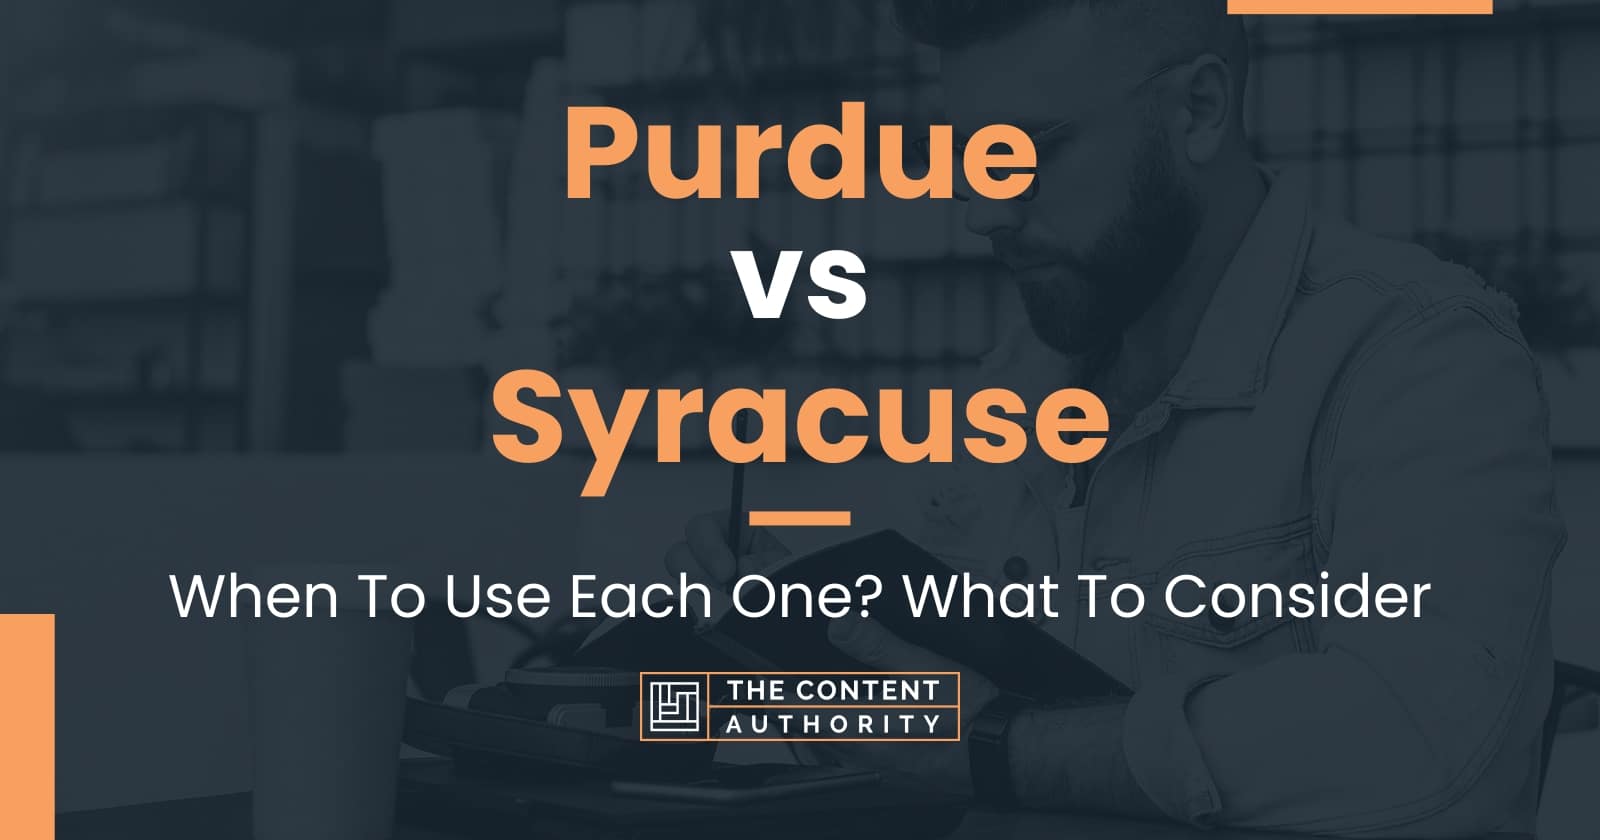 Purdue vs Syracuse When To Use Each One? What To Consider